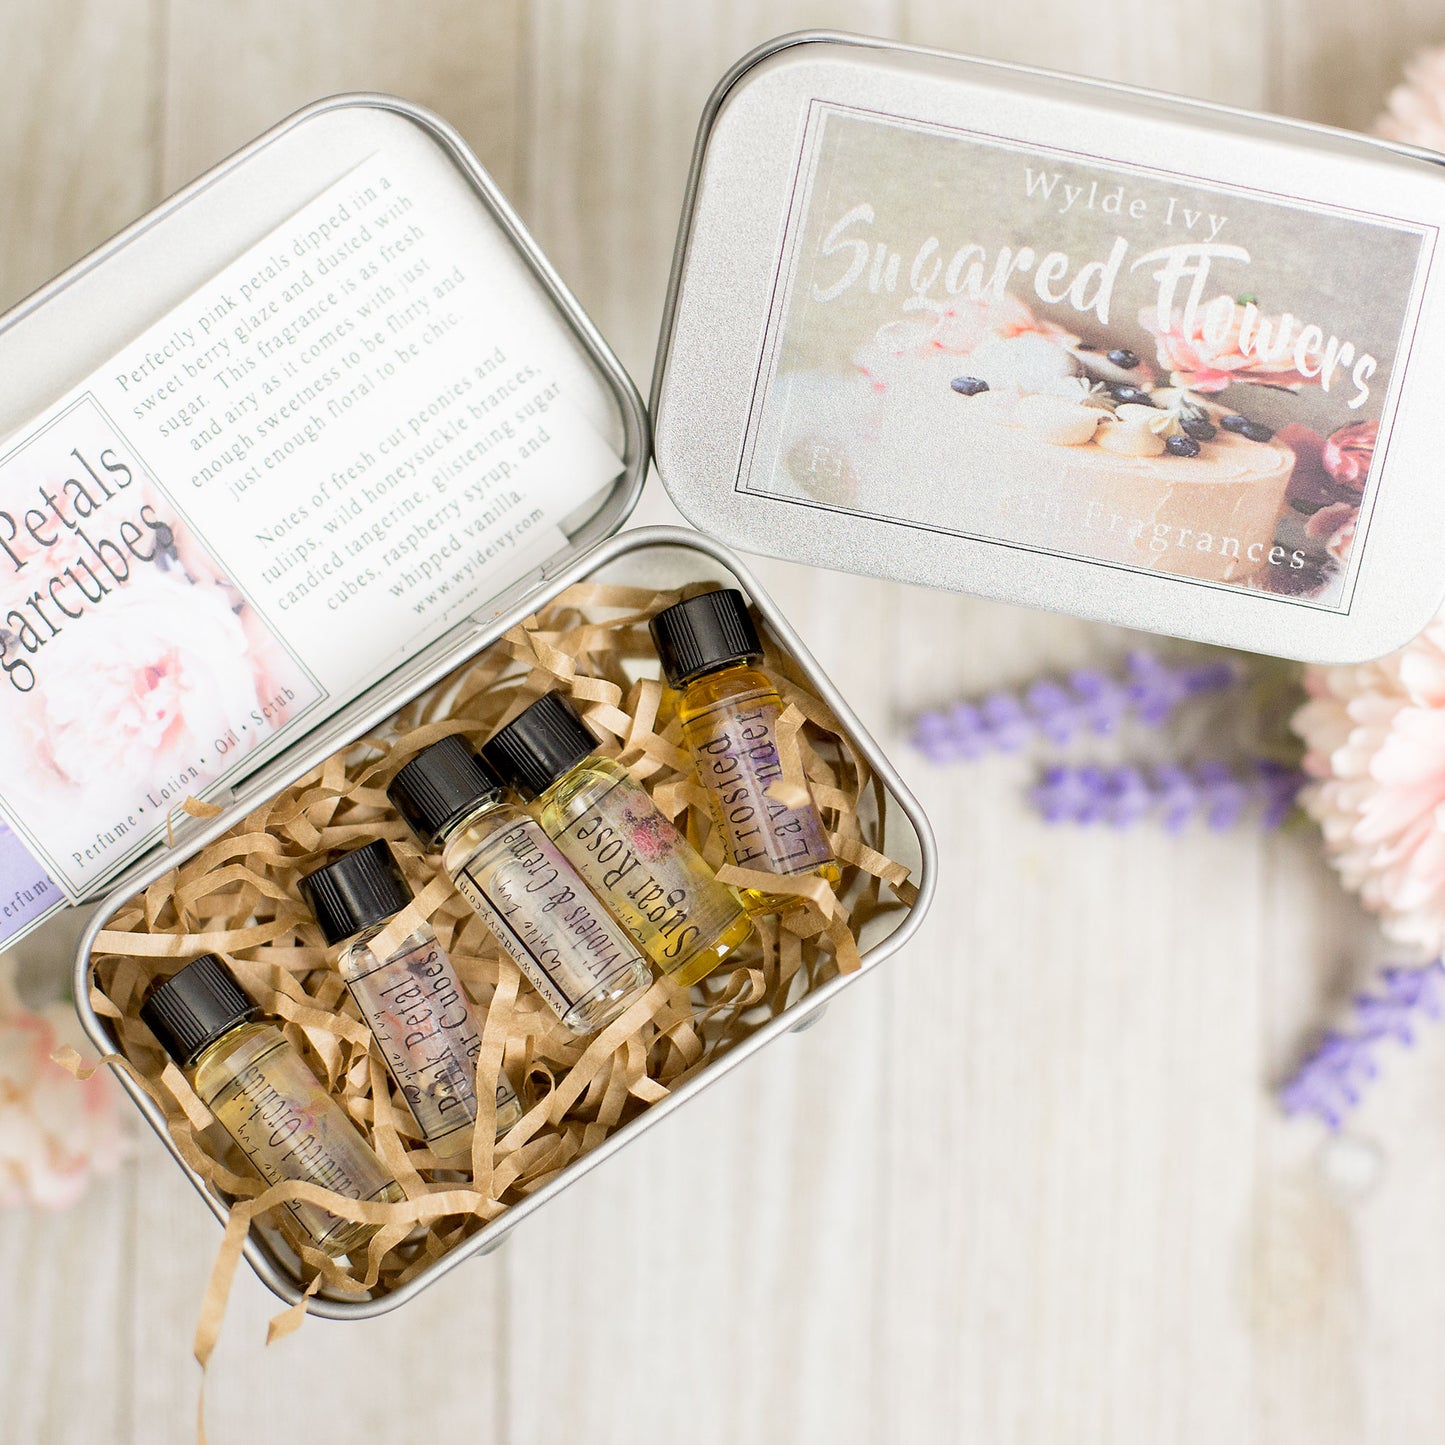 Sugared Flowers Collection Perfume Oil Sampler